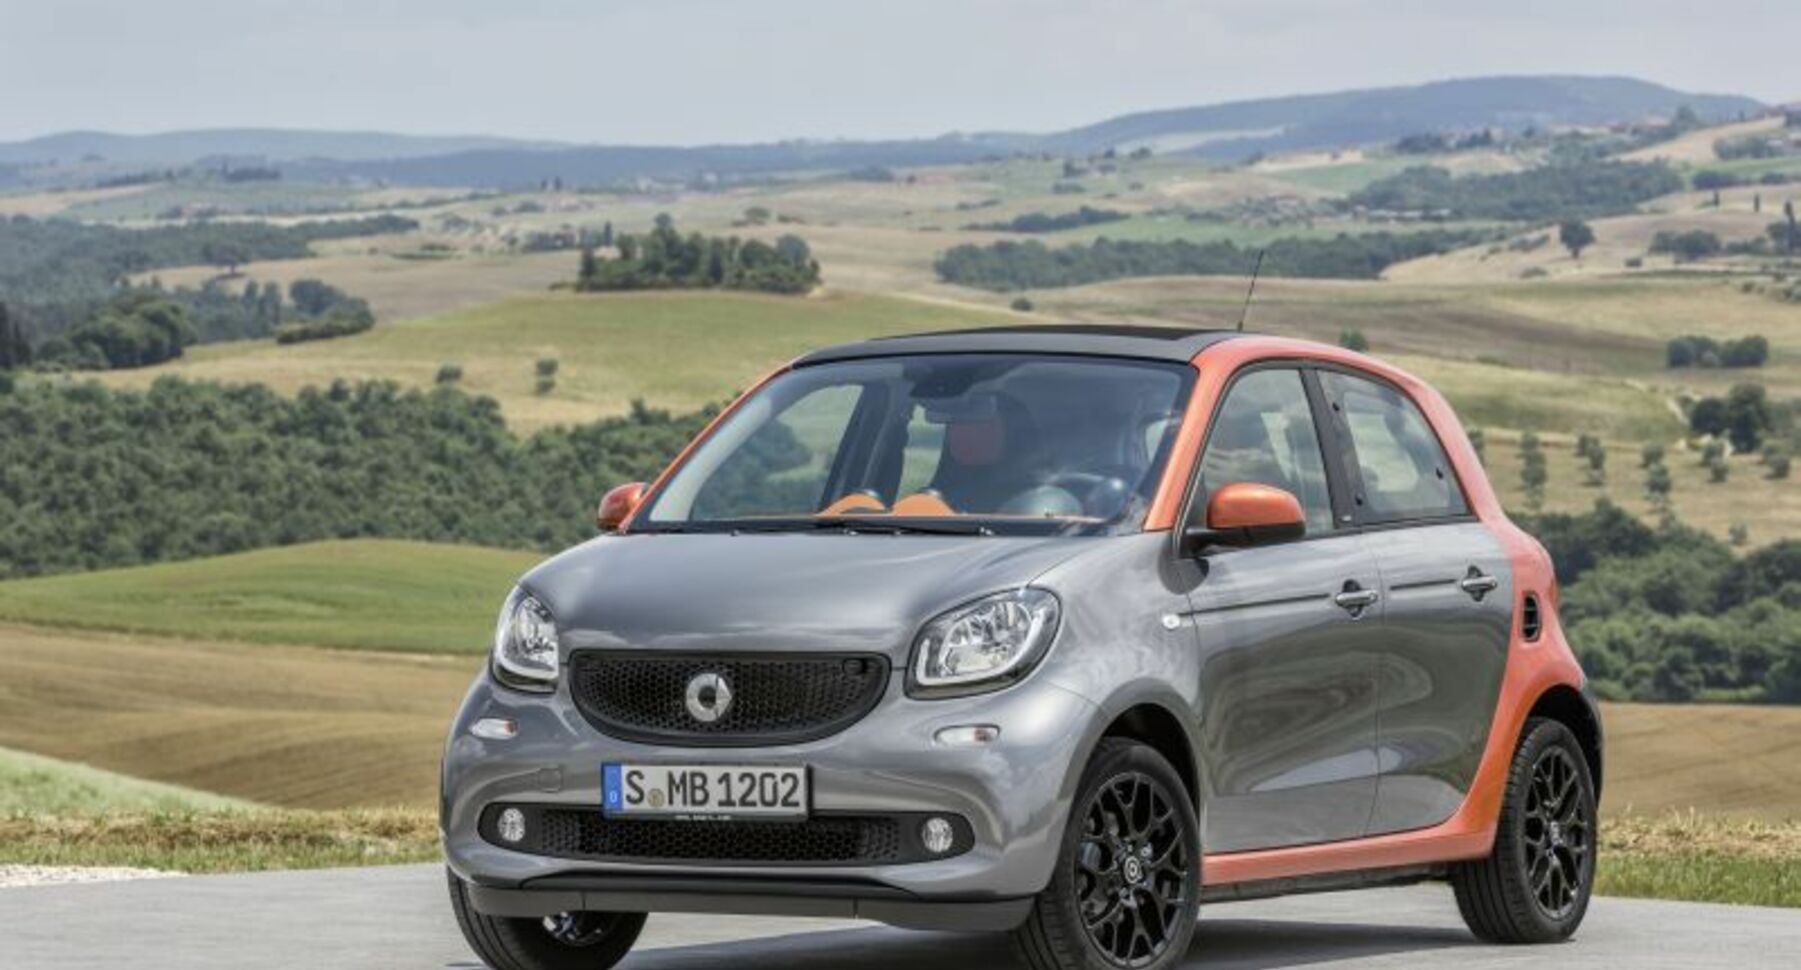 Smart Forfour II (W453) 1.0 (71 Hp) Automatic 2014, 2015, 2016, 2017, 2018, 2019